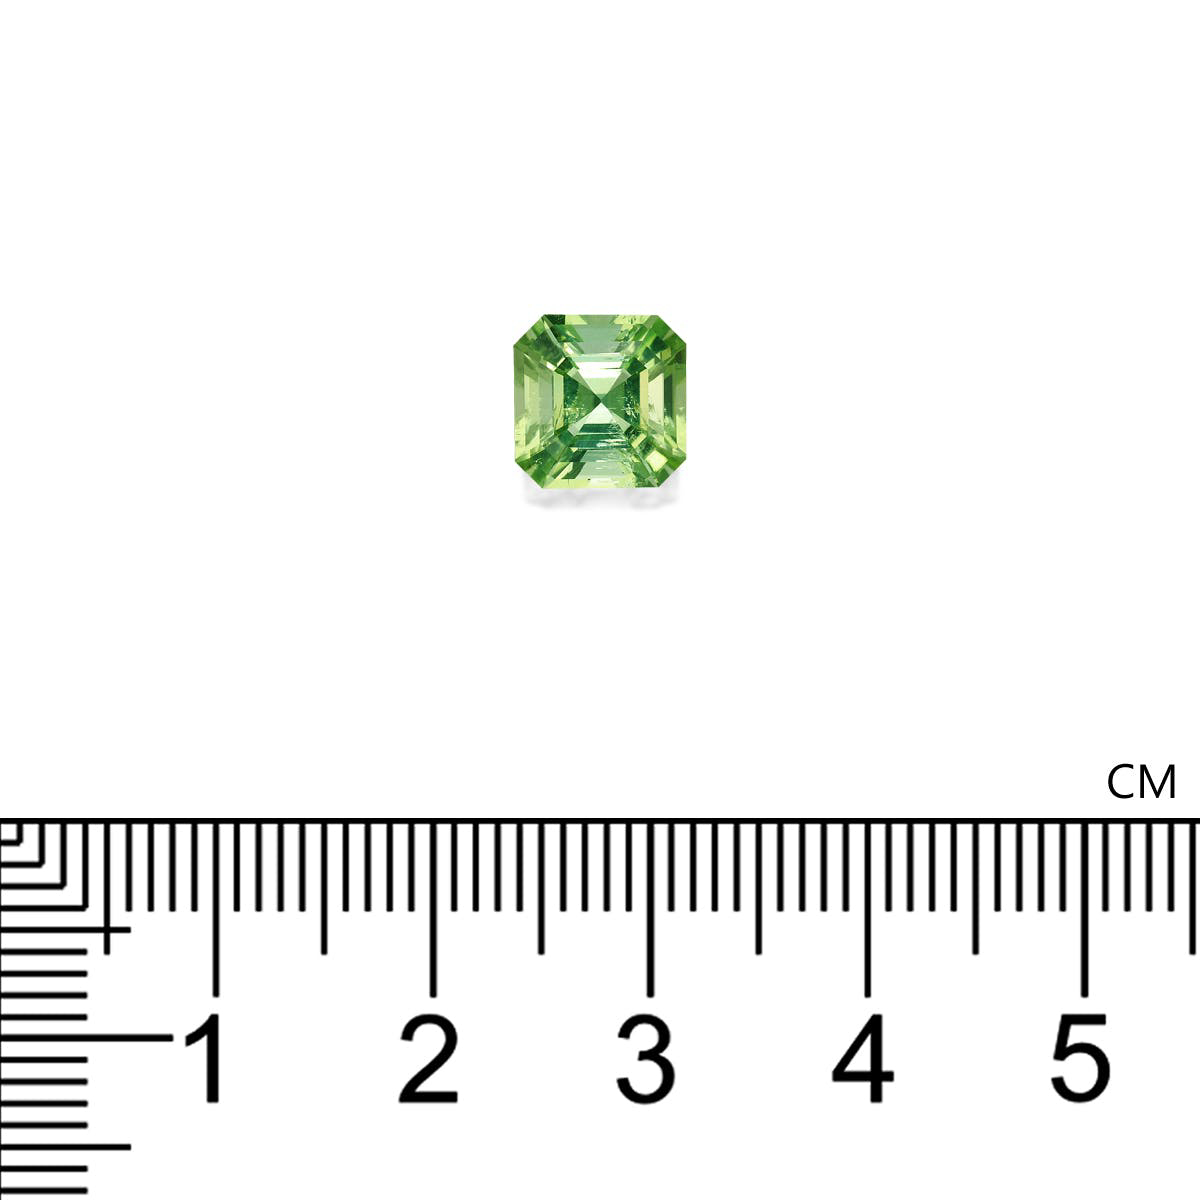 Picture of Olive Green Tourmaline 2.77ct - 8mm (TG1223)